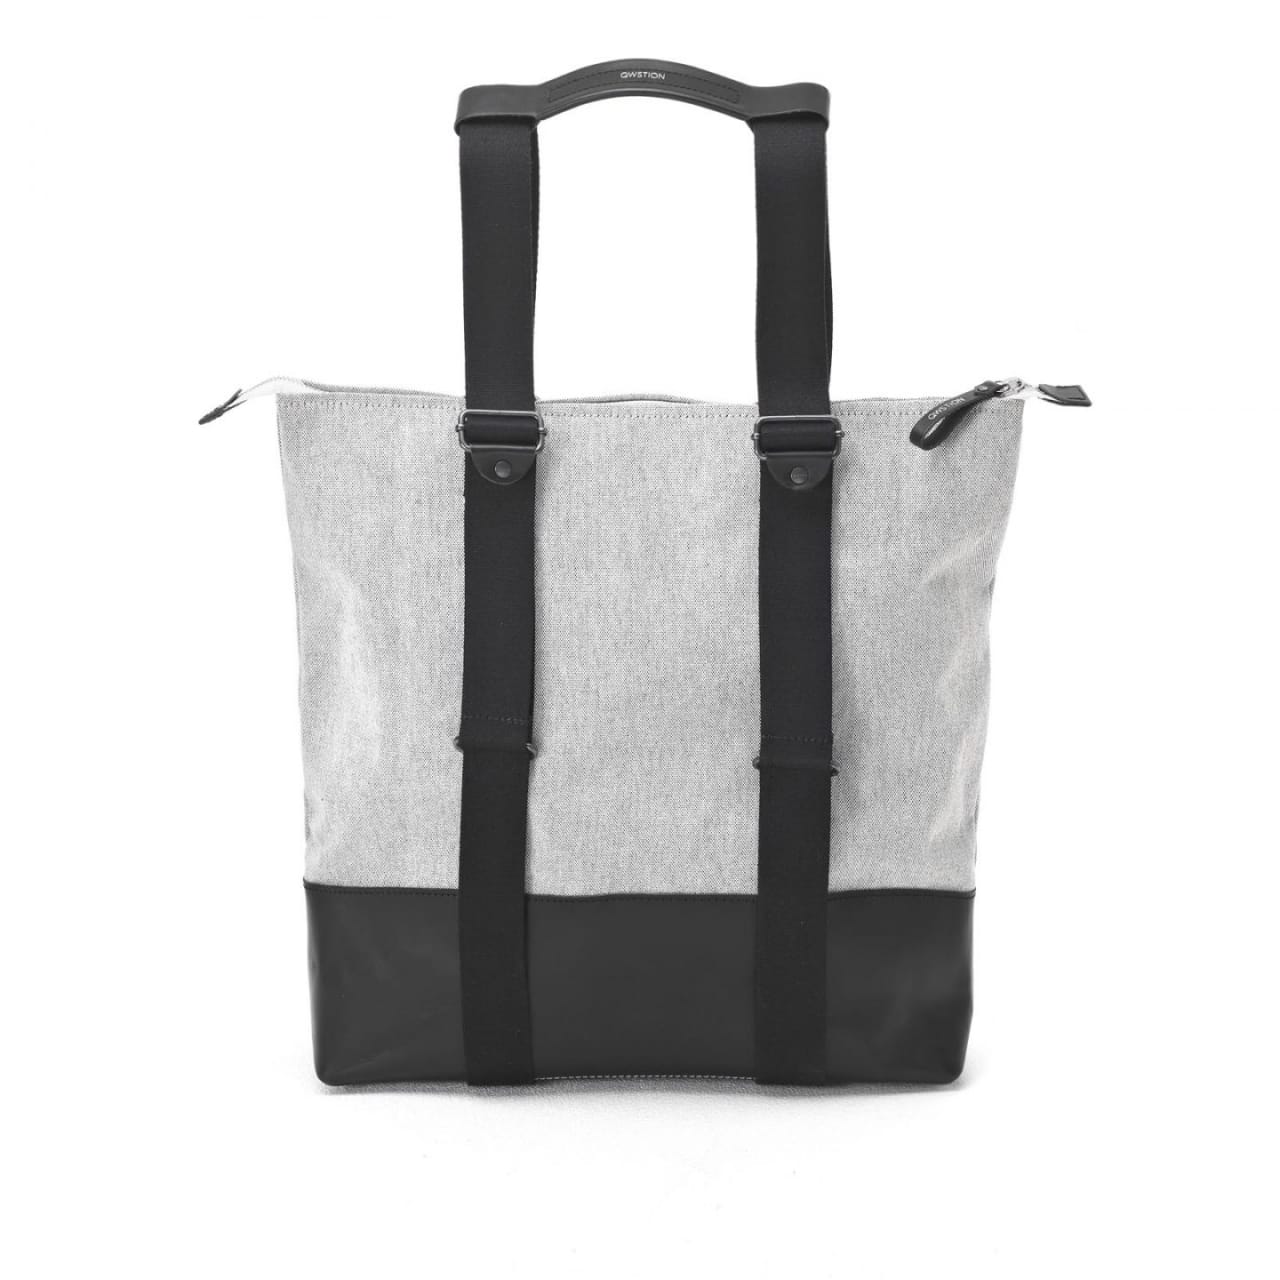 Front of zip tote bag with white canvas, black canvas straps and handle, and black zipper pulls.